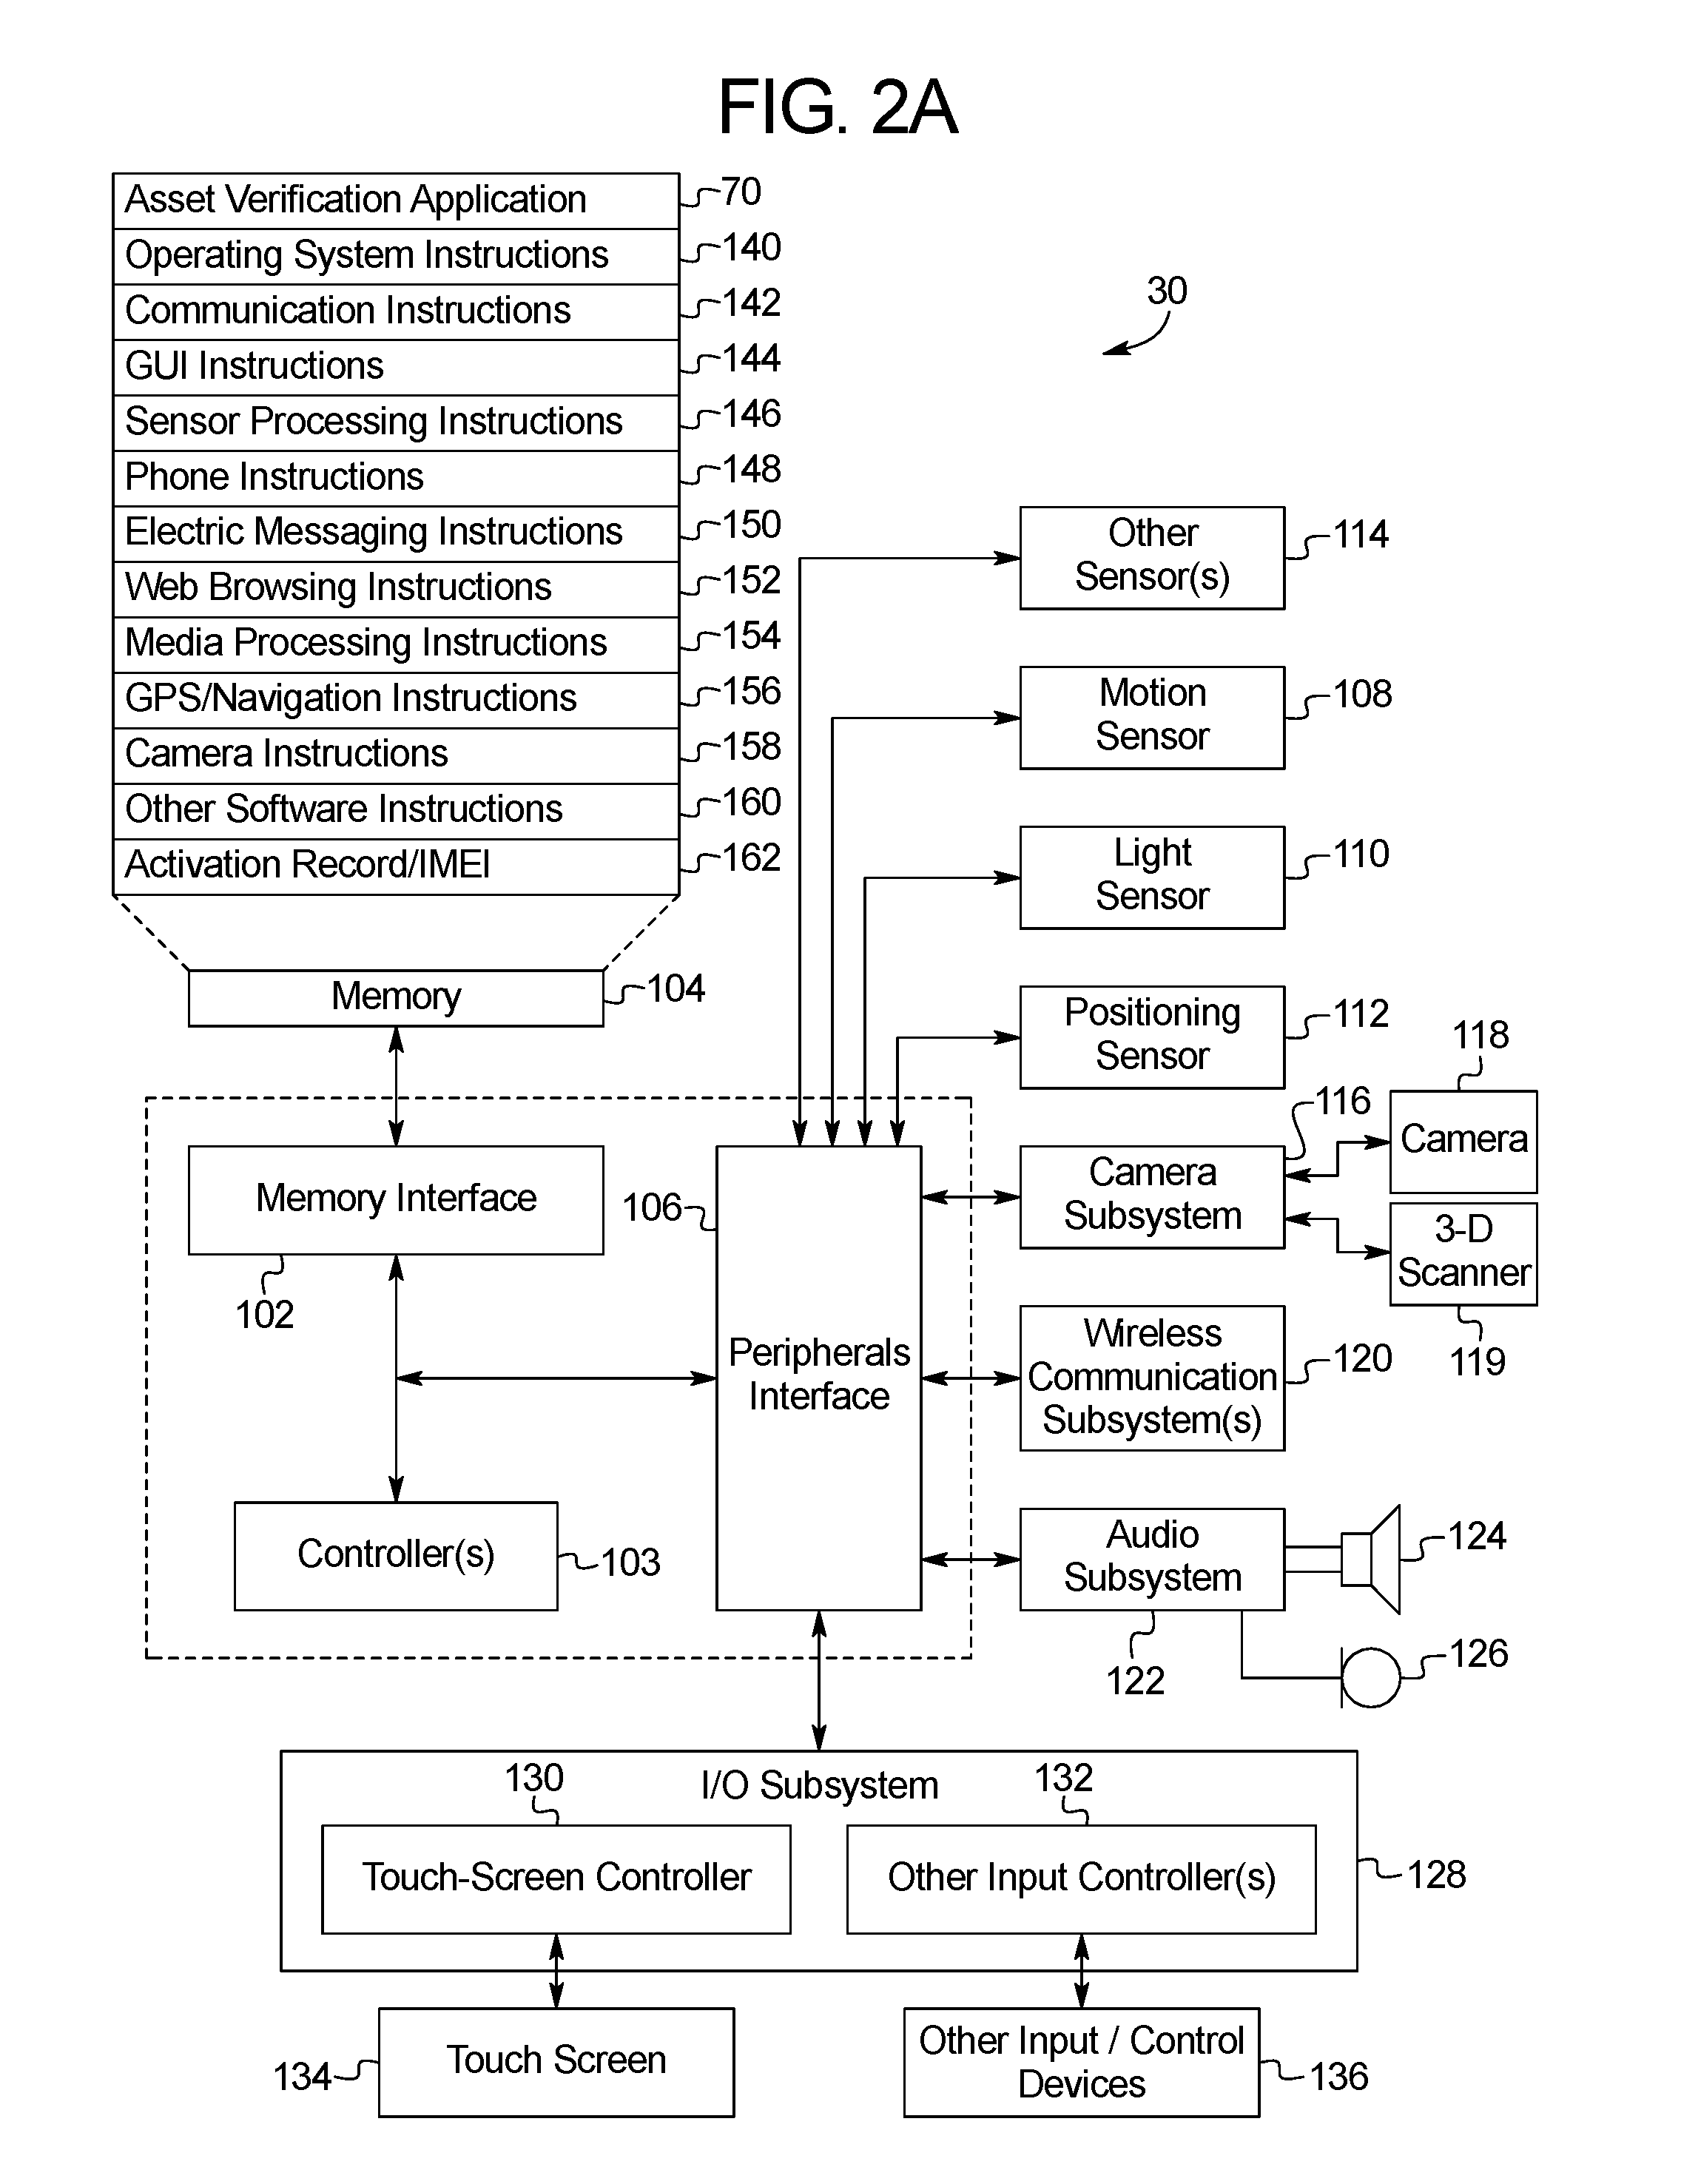 Insurance Asset Verification and Claims Processing System